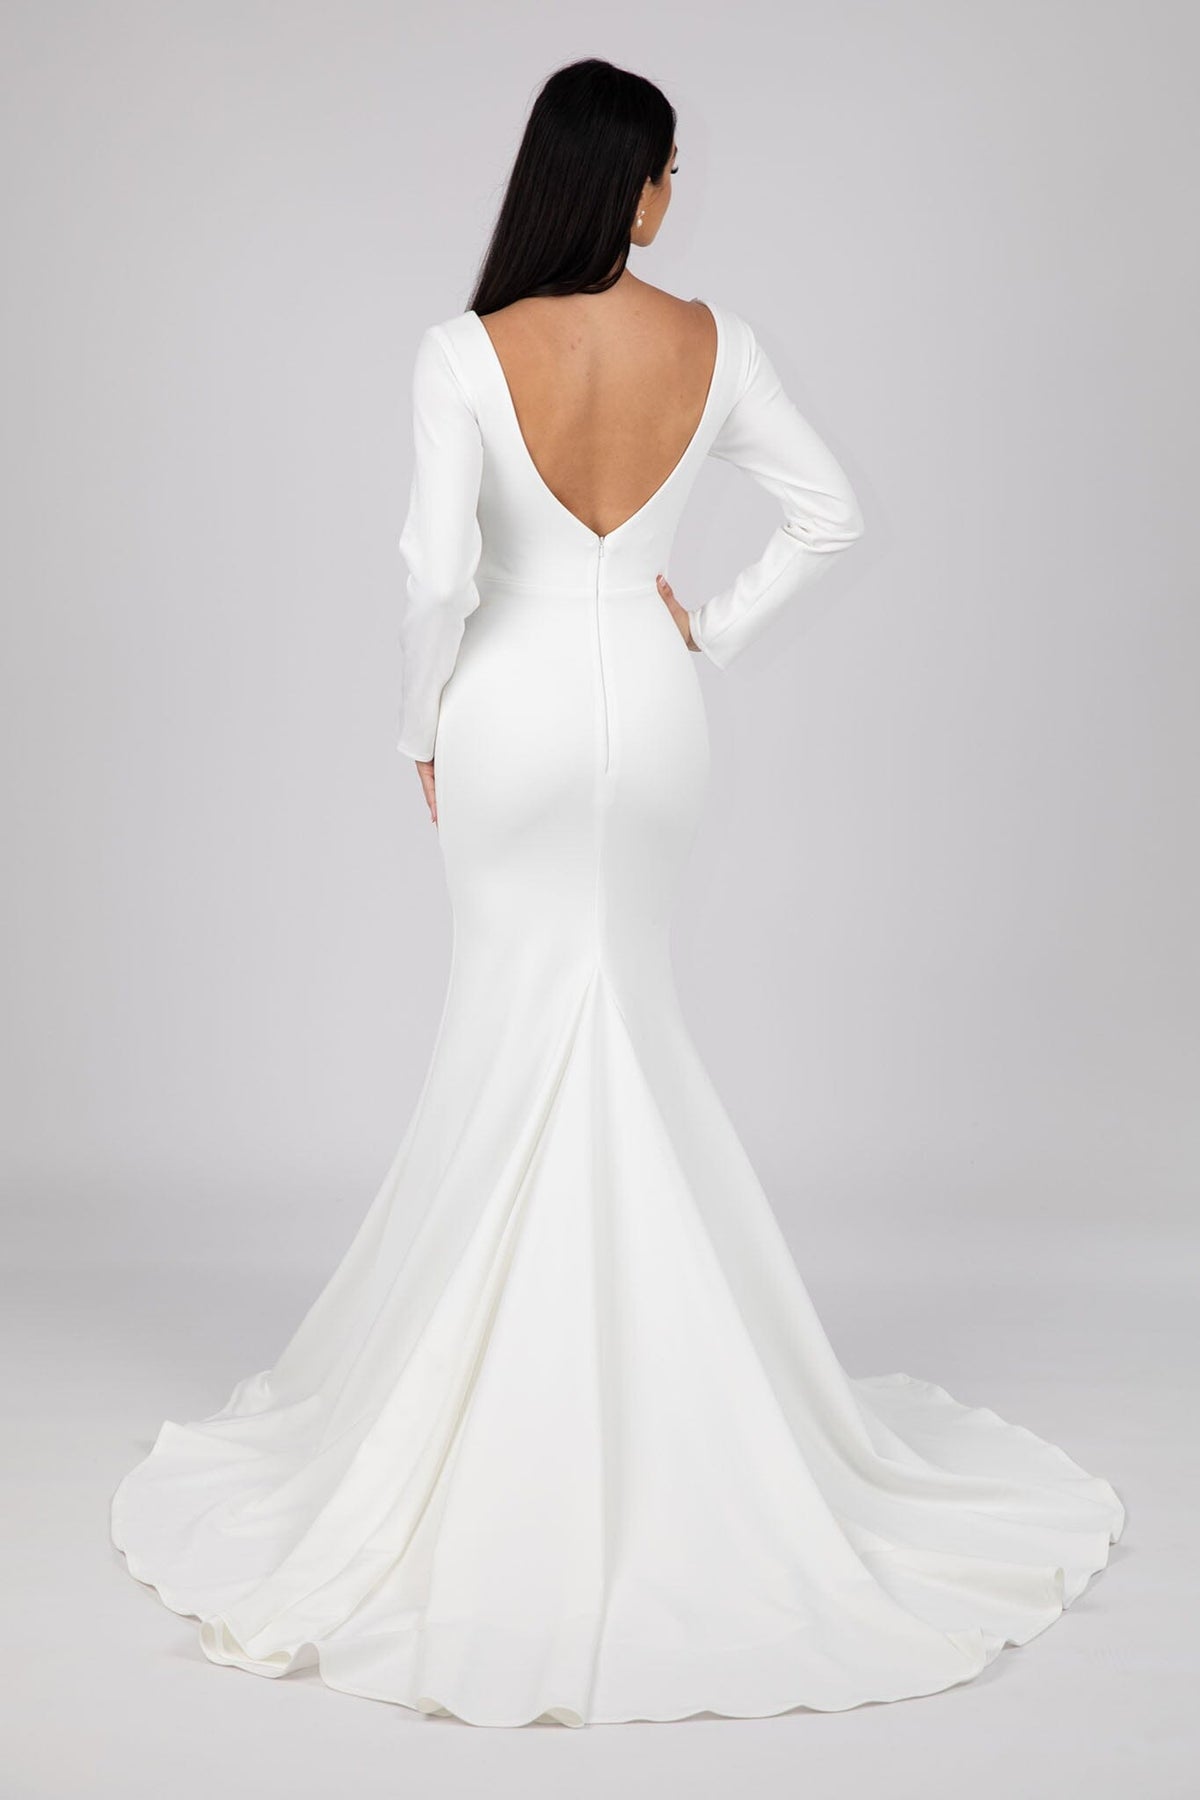 V Open Back Design of Ivory White Long Sleeve Fit and Flare Wedding Gown with V Neckline